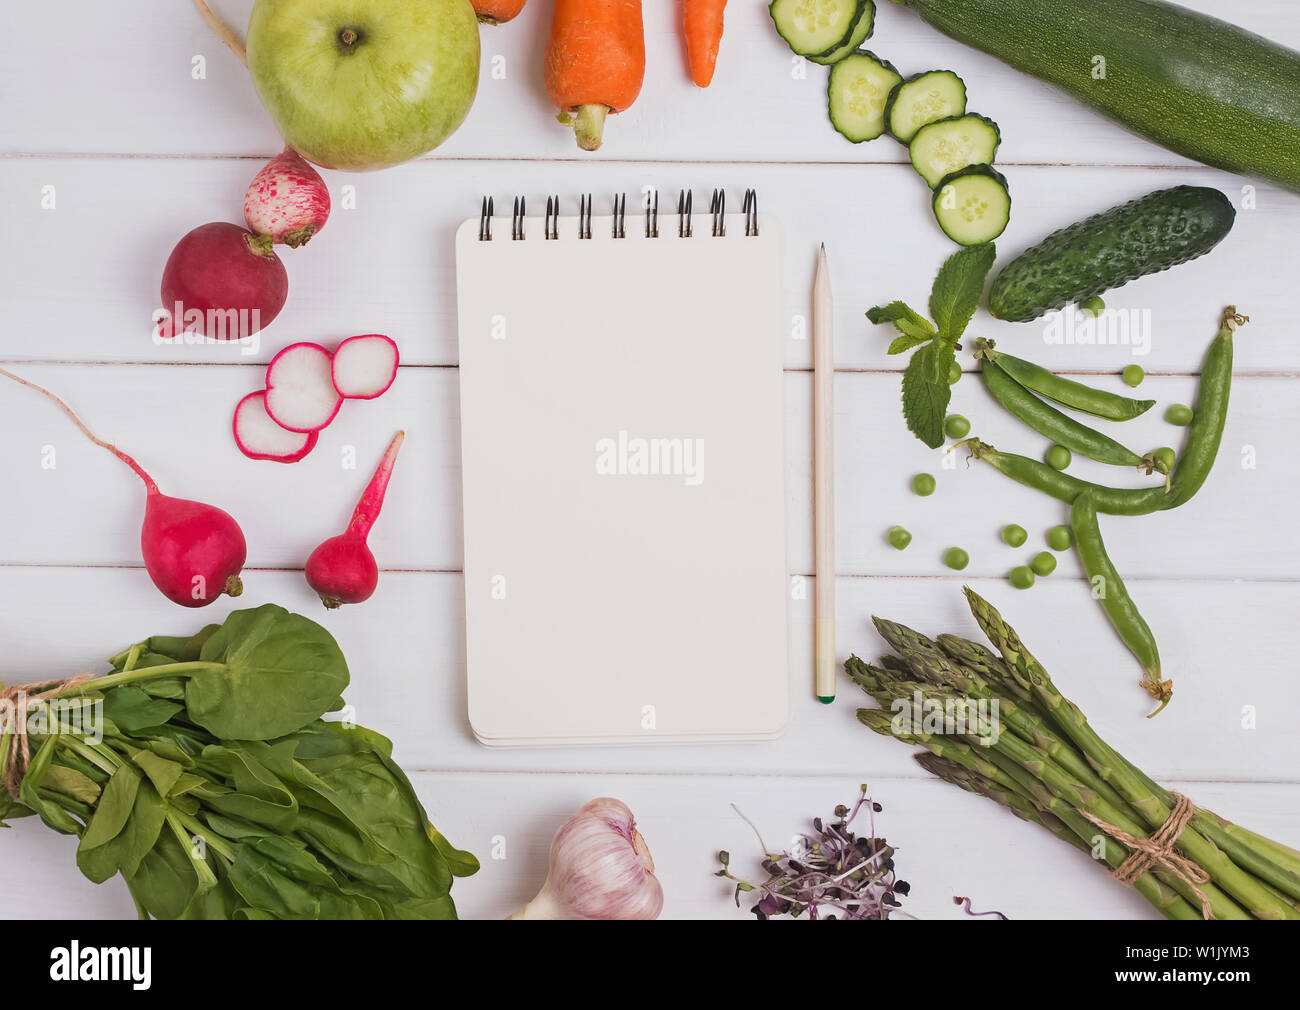 Meal plan of menu concept. Empty paper mock-up in the cener of different vegetables and fruits, top view Stock Photo